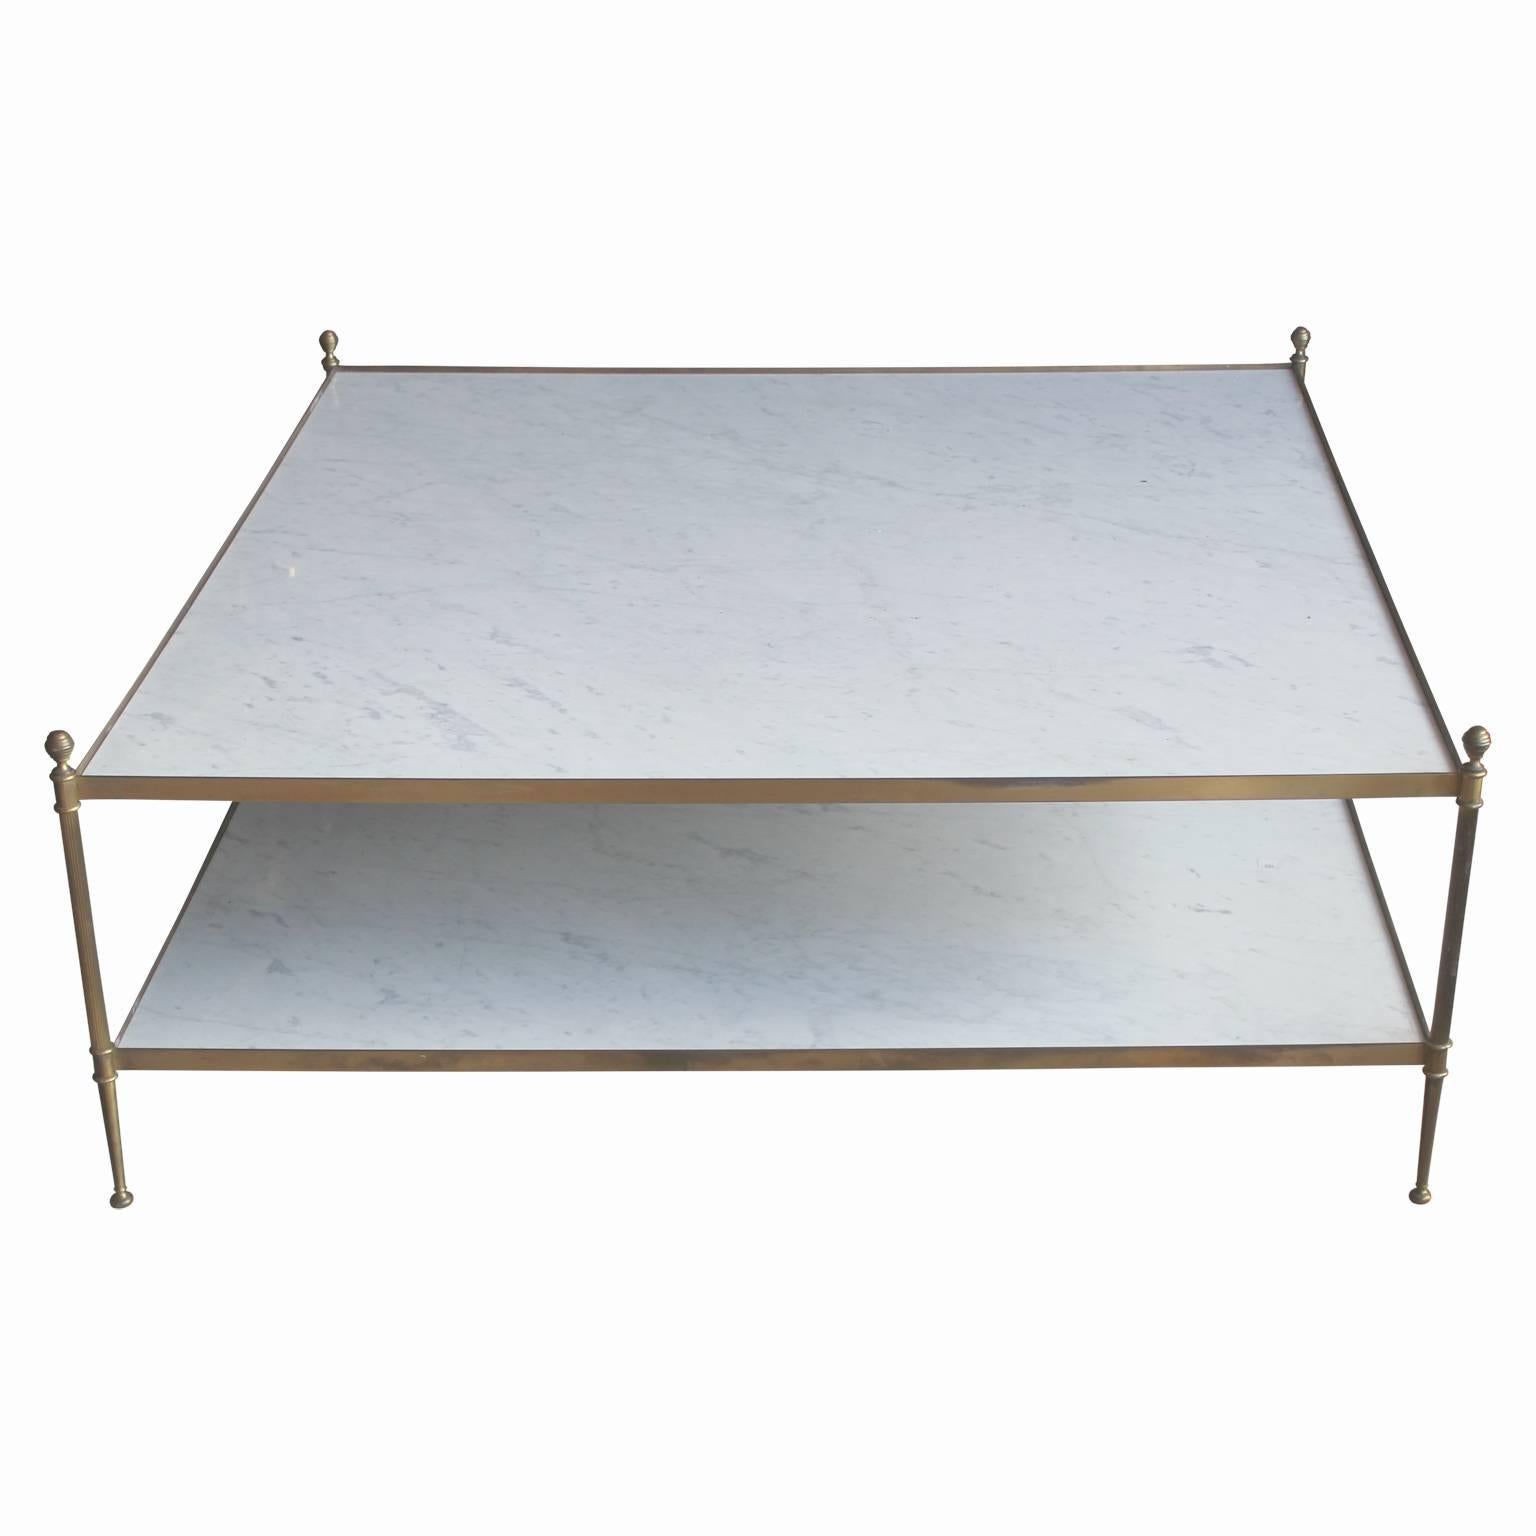 Hollywood Regency marble and brass two-tiered square coffee table. So gorgeous! The brass has a nice patina and the marble is beautiful. Perfect for any modern, mid-mod or hollywood regency home. 